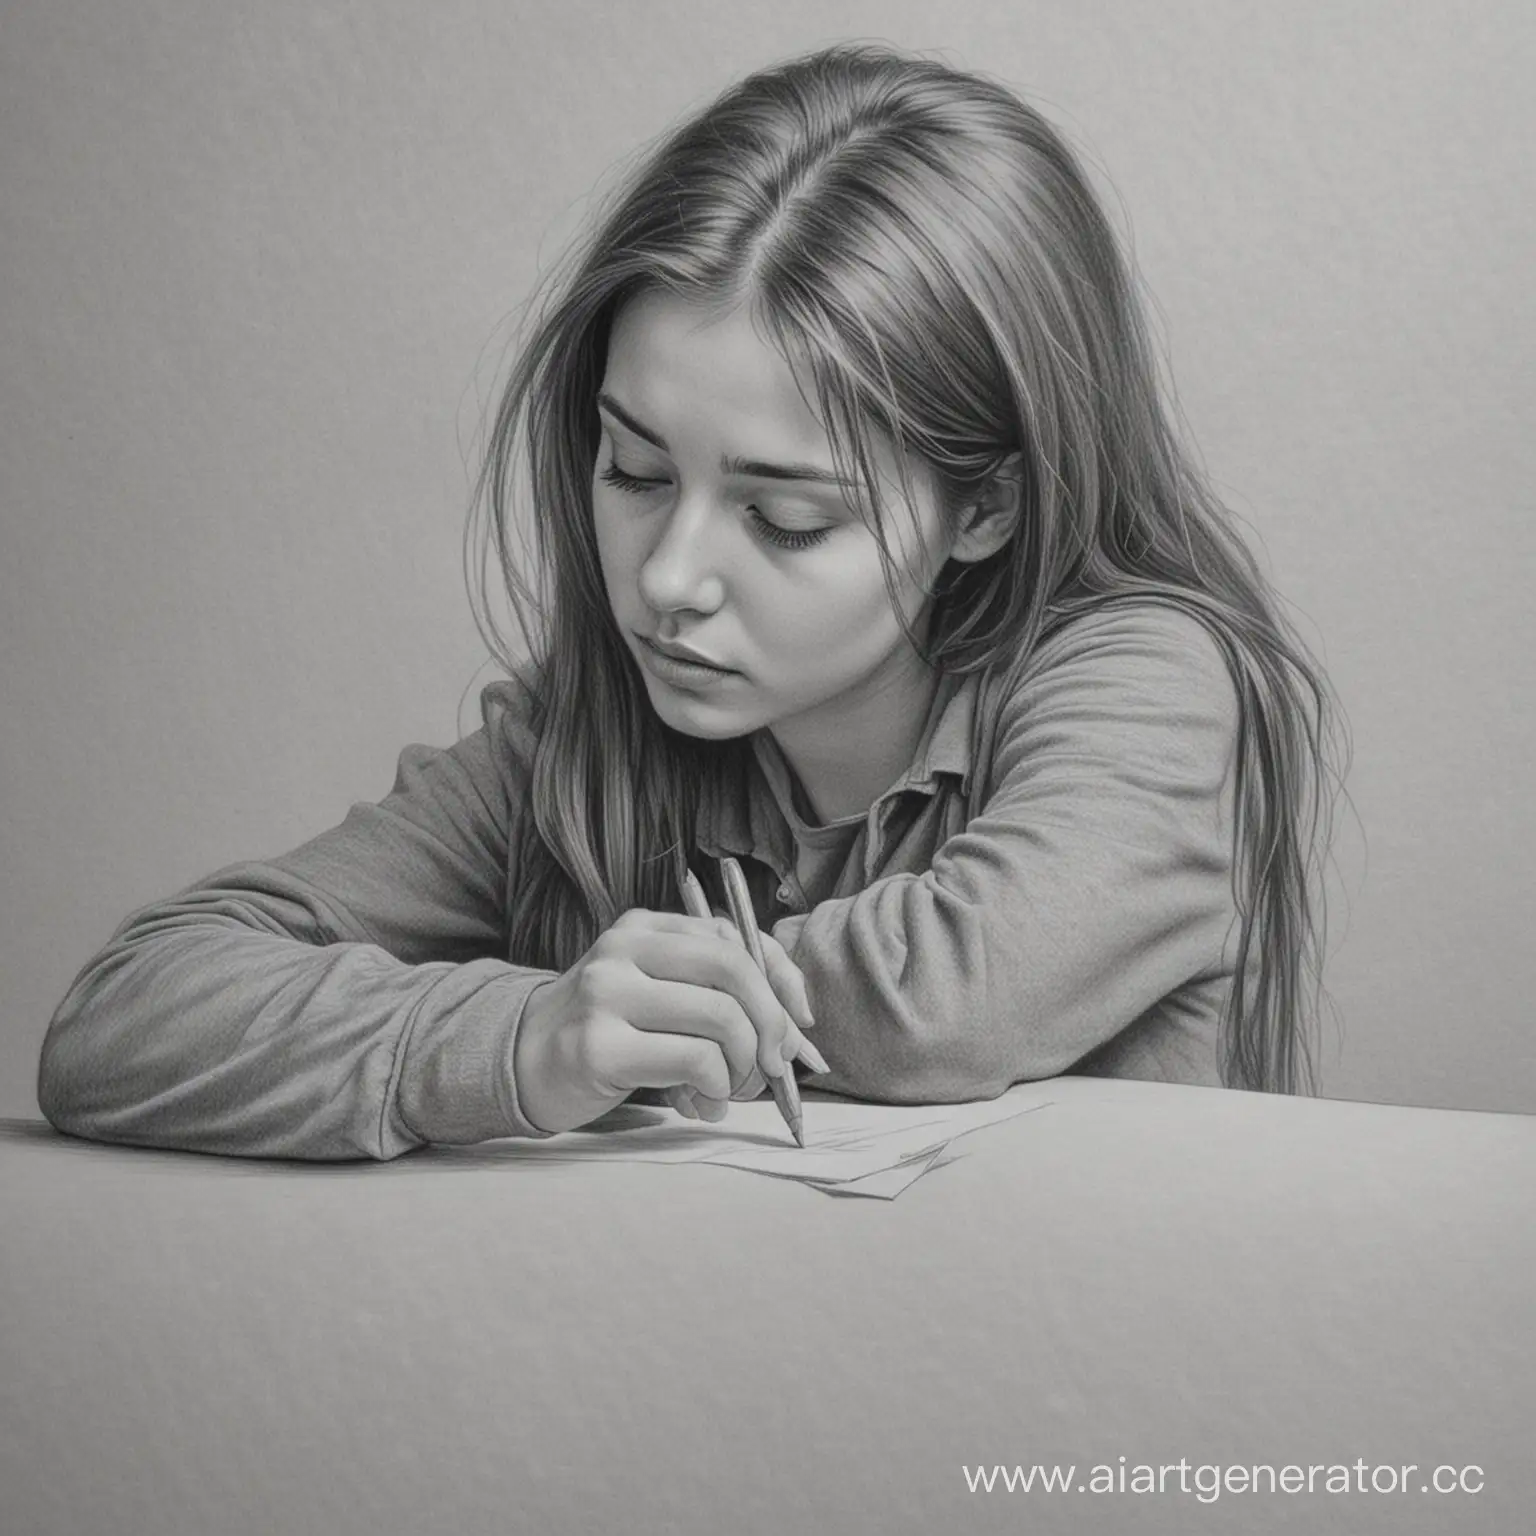 Emotive-Pencil-Sketch-of-Loneliness-and-Sadness